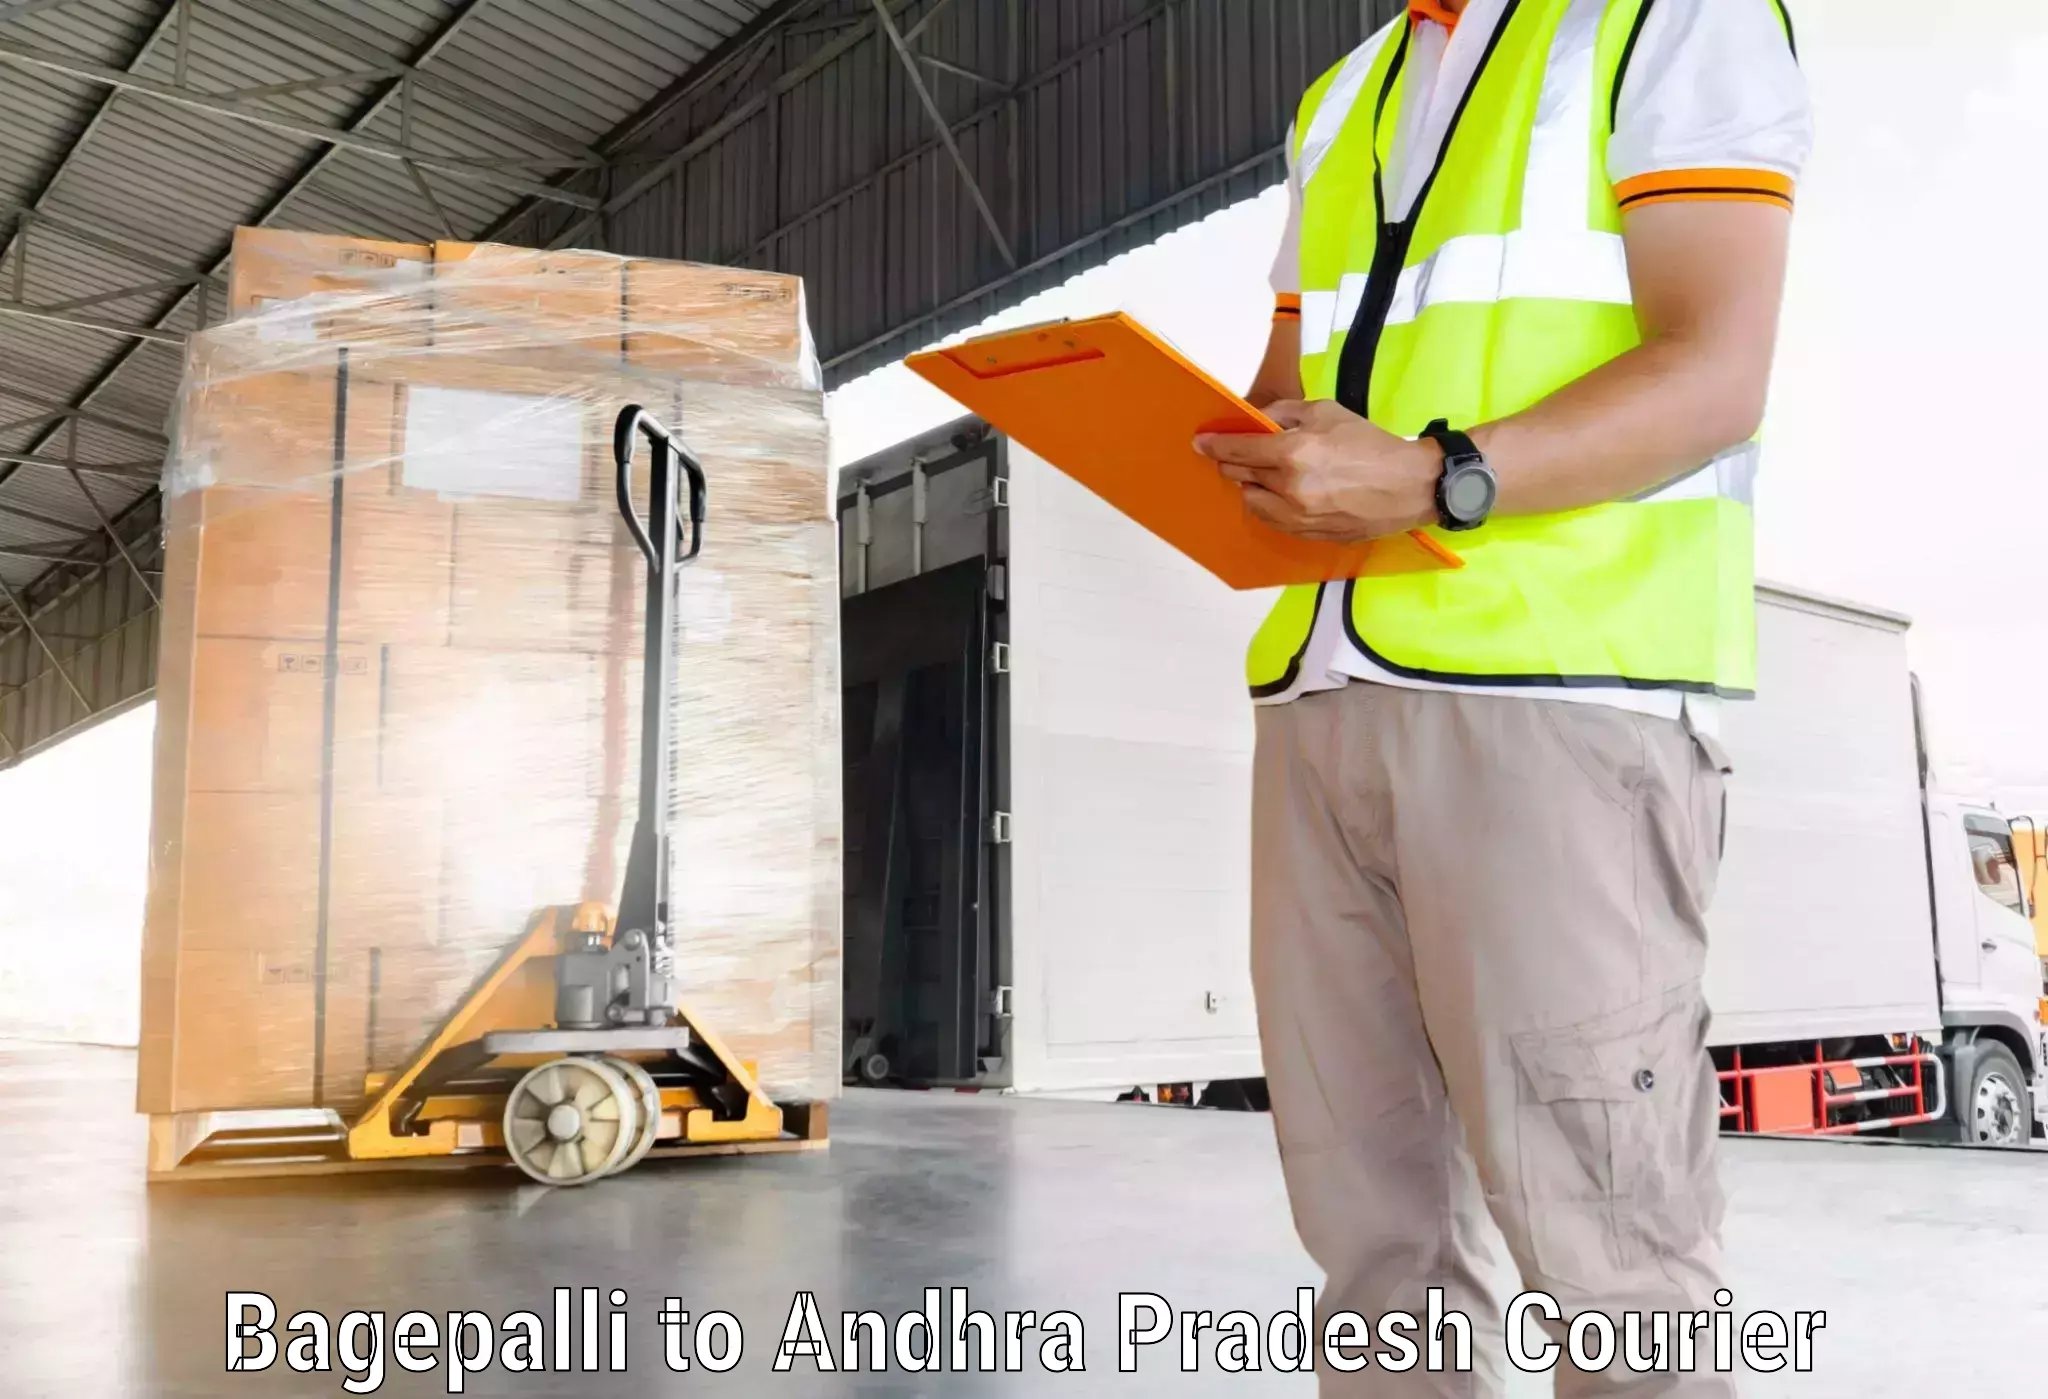 Flexible delivery scheduling in Bagepalli to Anantapur